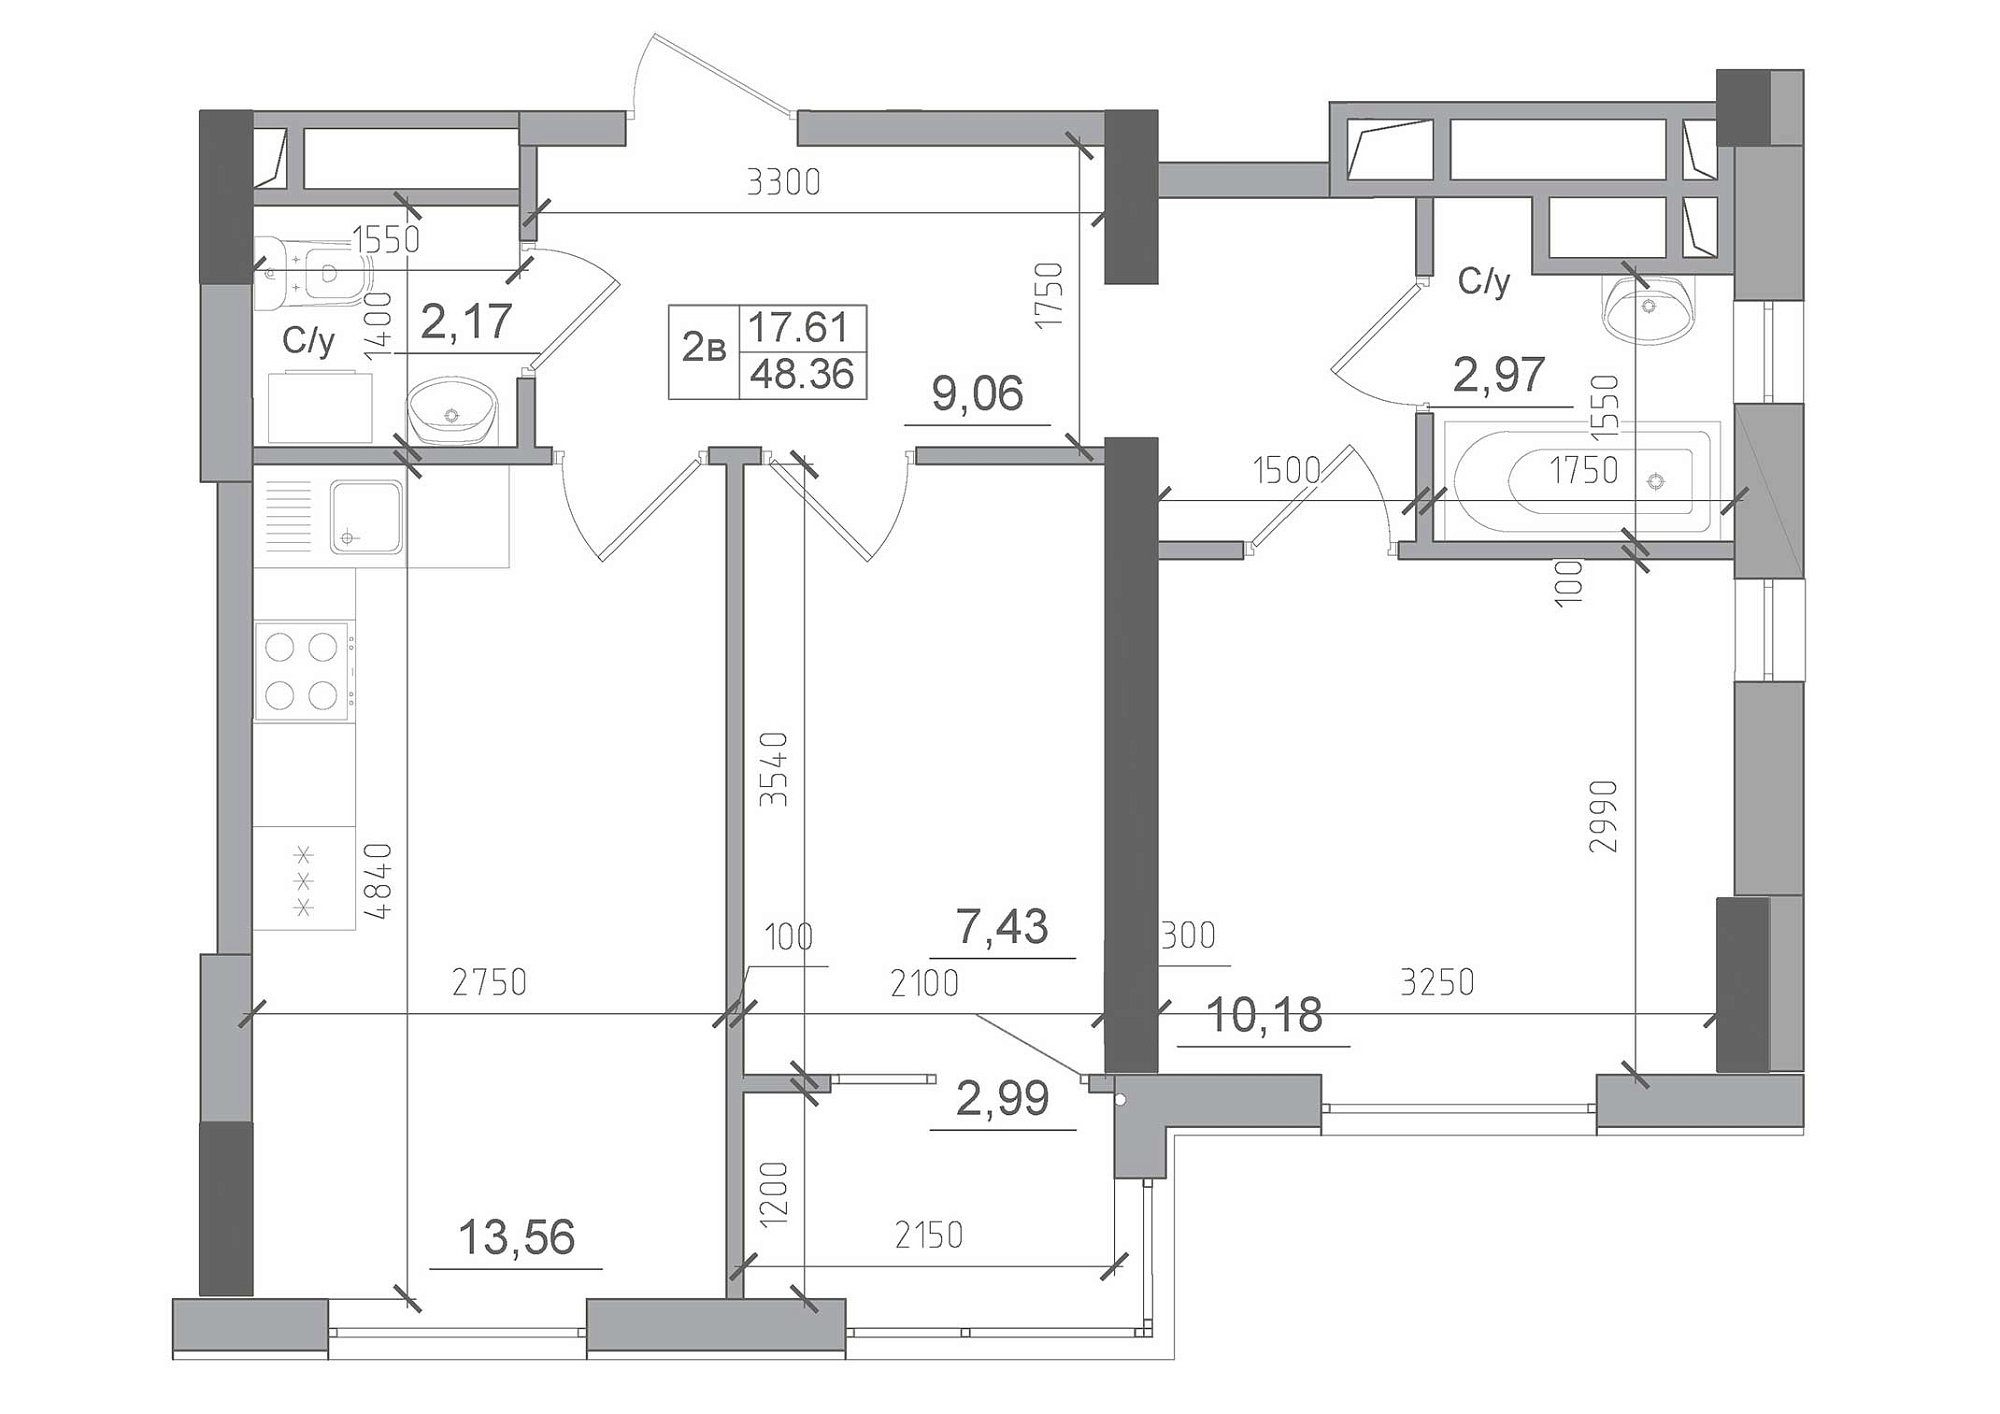 Planning 2-rm flats area 48.36m2, AB-22-05/00010.